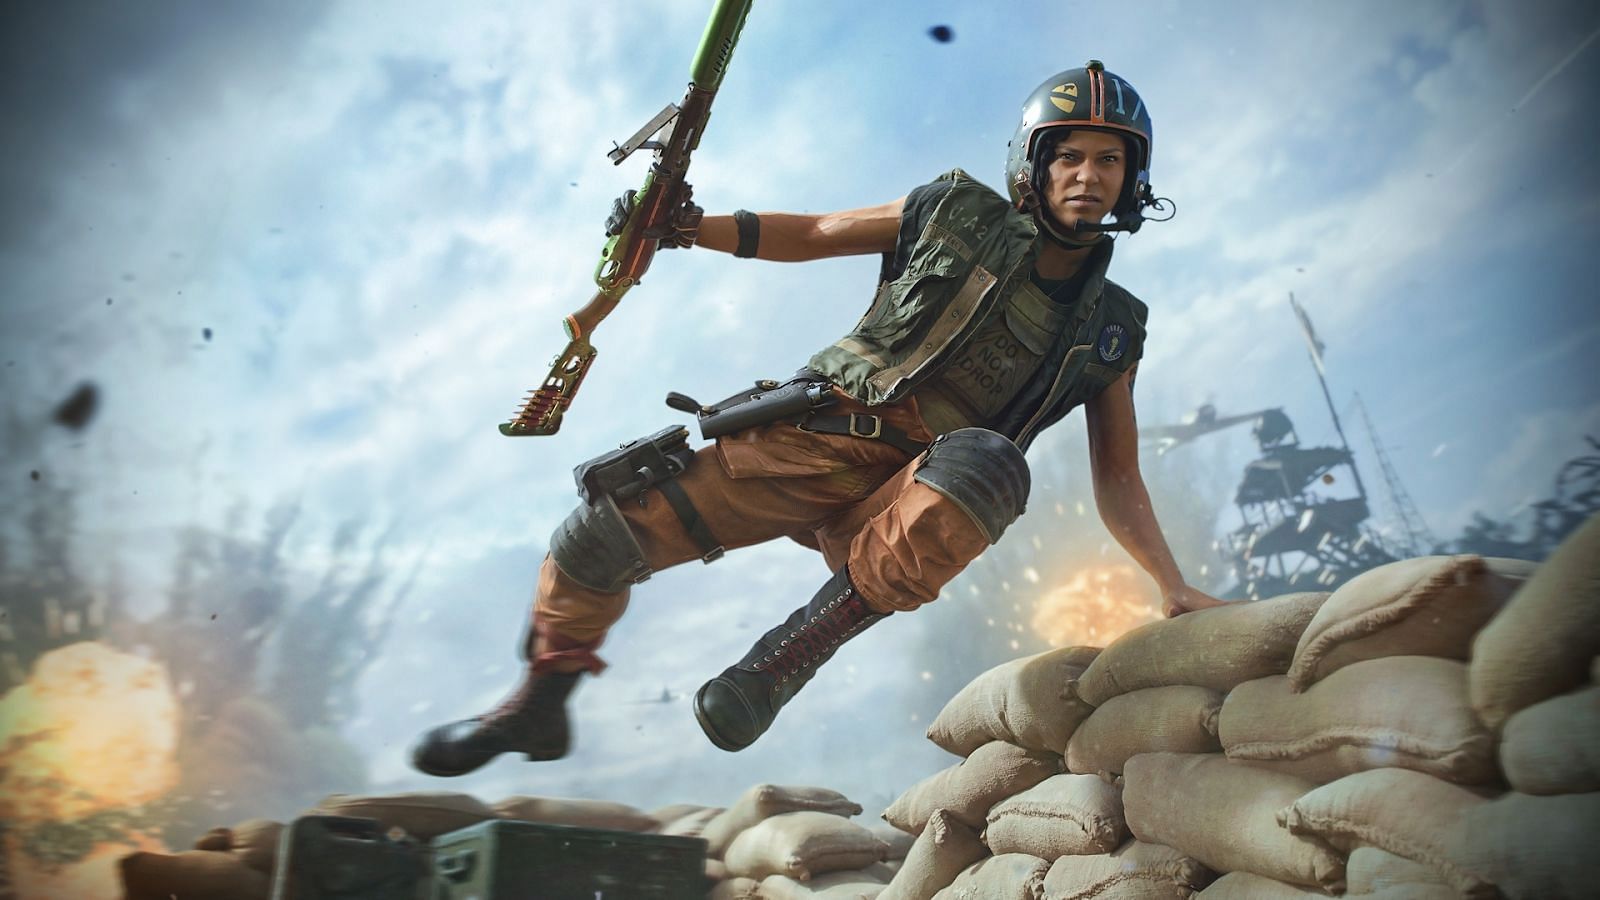 Florence is known for being a great pilot in the Call of Duty universe (Image via Activision)